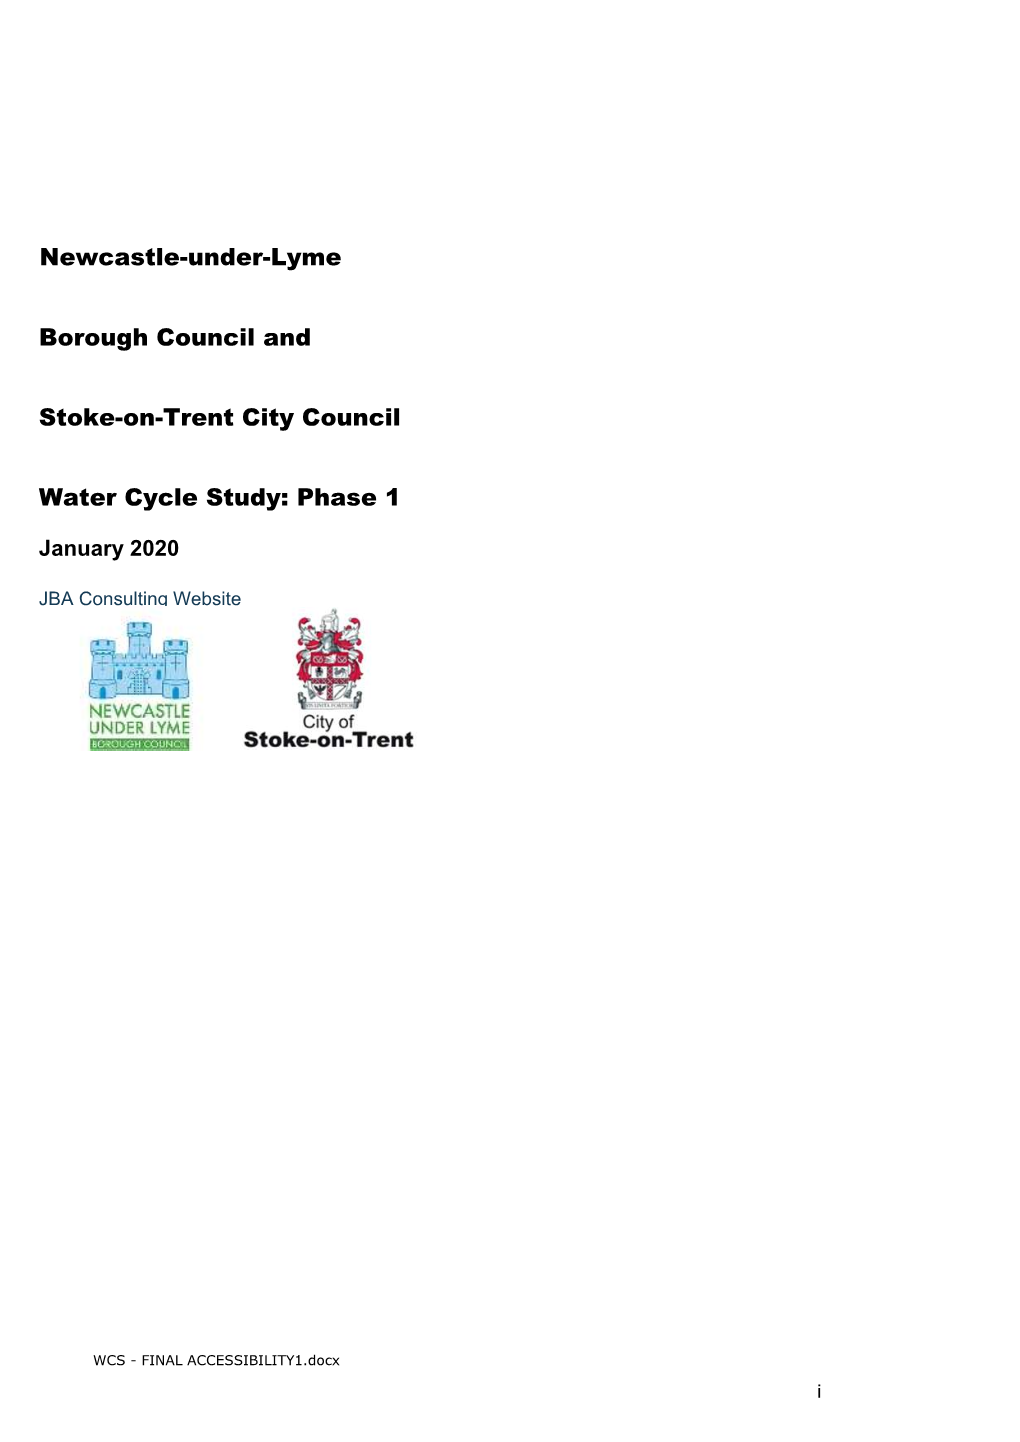 Newcastle Under Lyme Borough Council and Stoke-On-Trent City